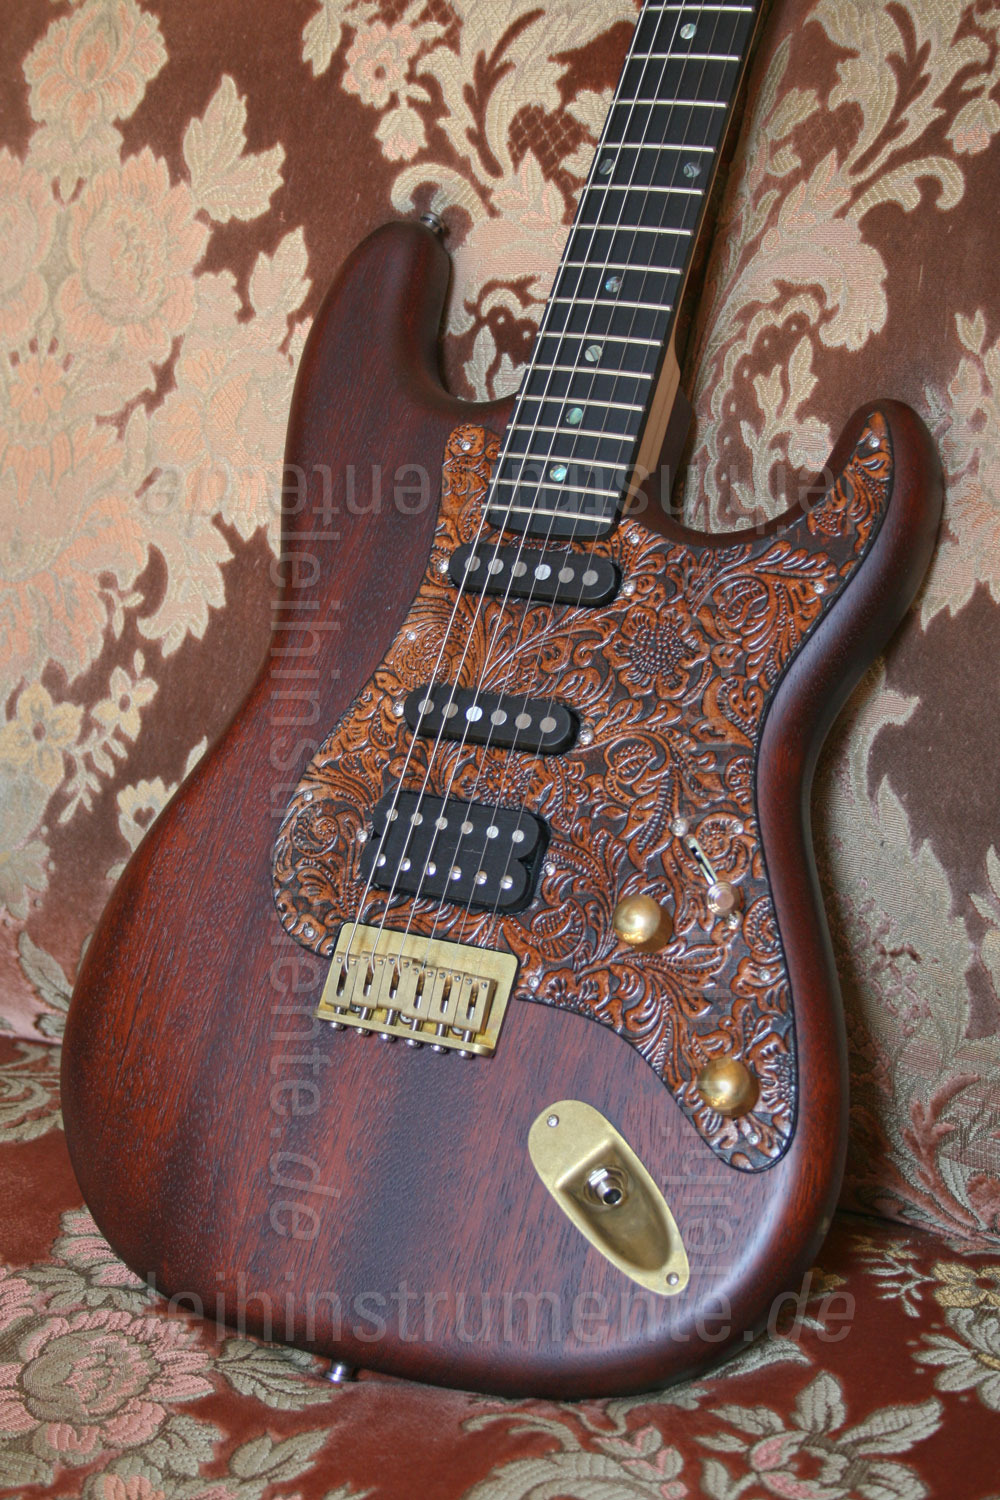 to article description / price Electric Guitar BERSTECHER Deluxe Vintage - Old Whisky / Floral Amber + hard case - made in Germany